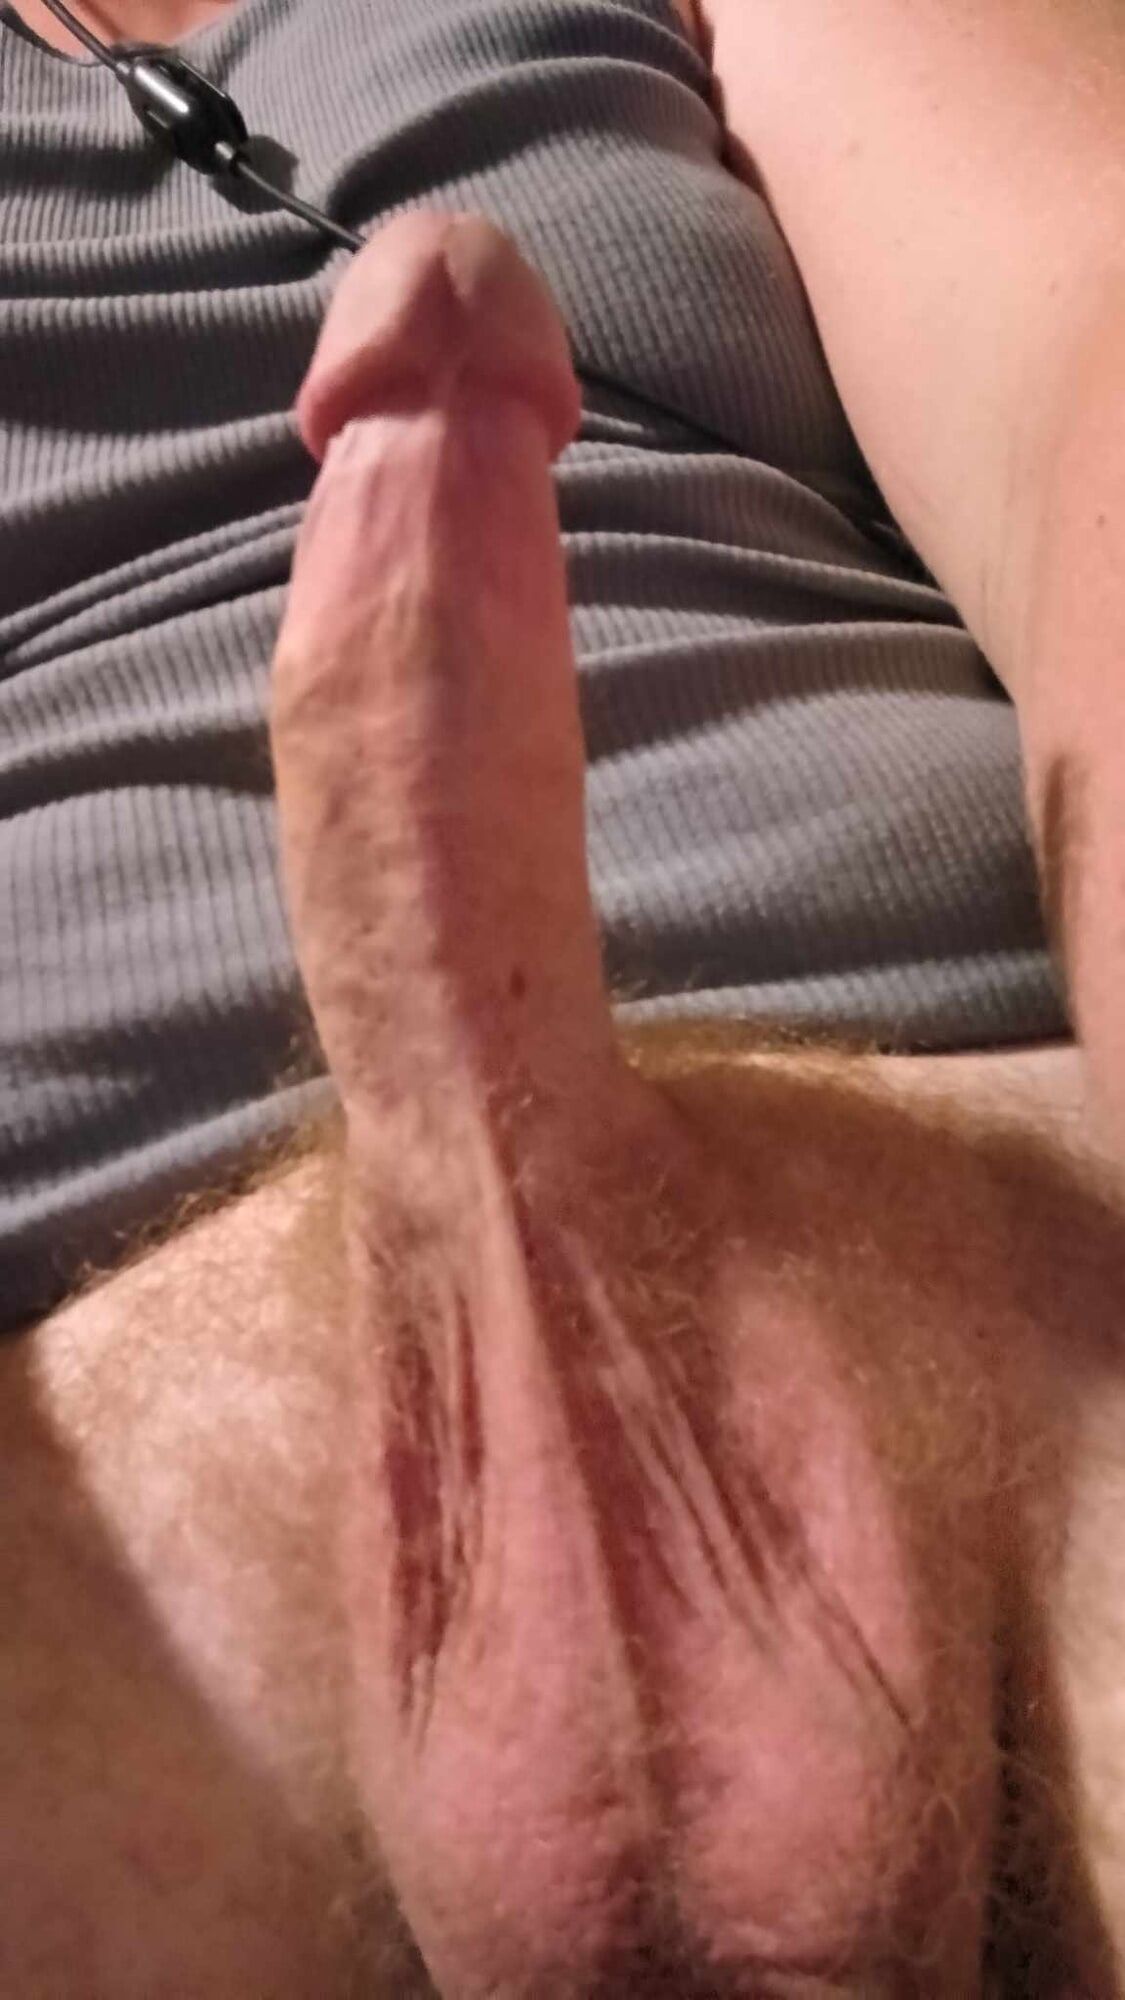 showing off my throbbing cock